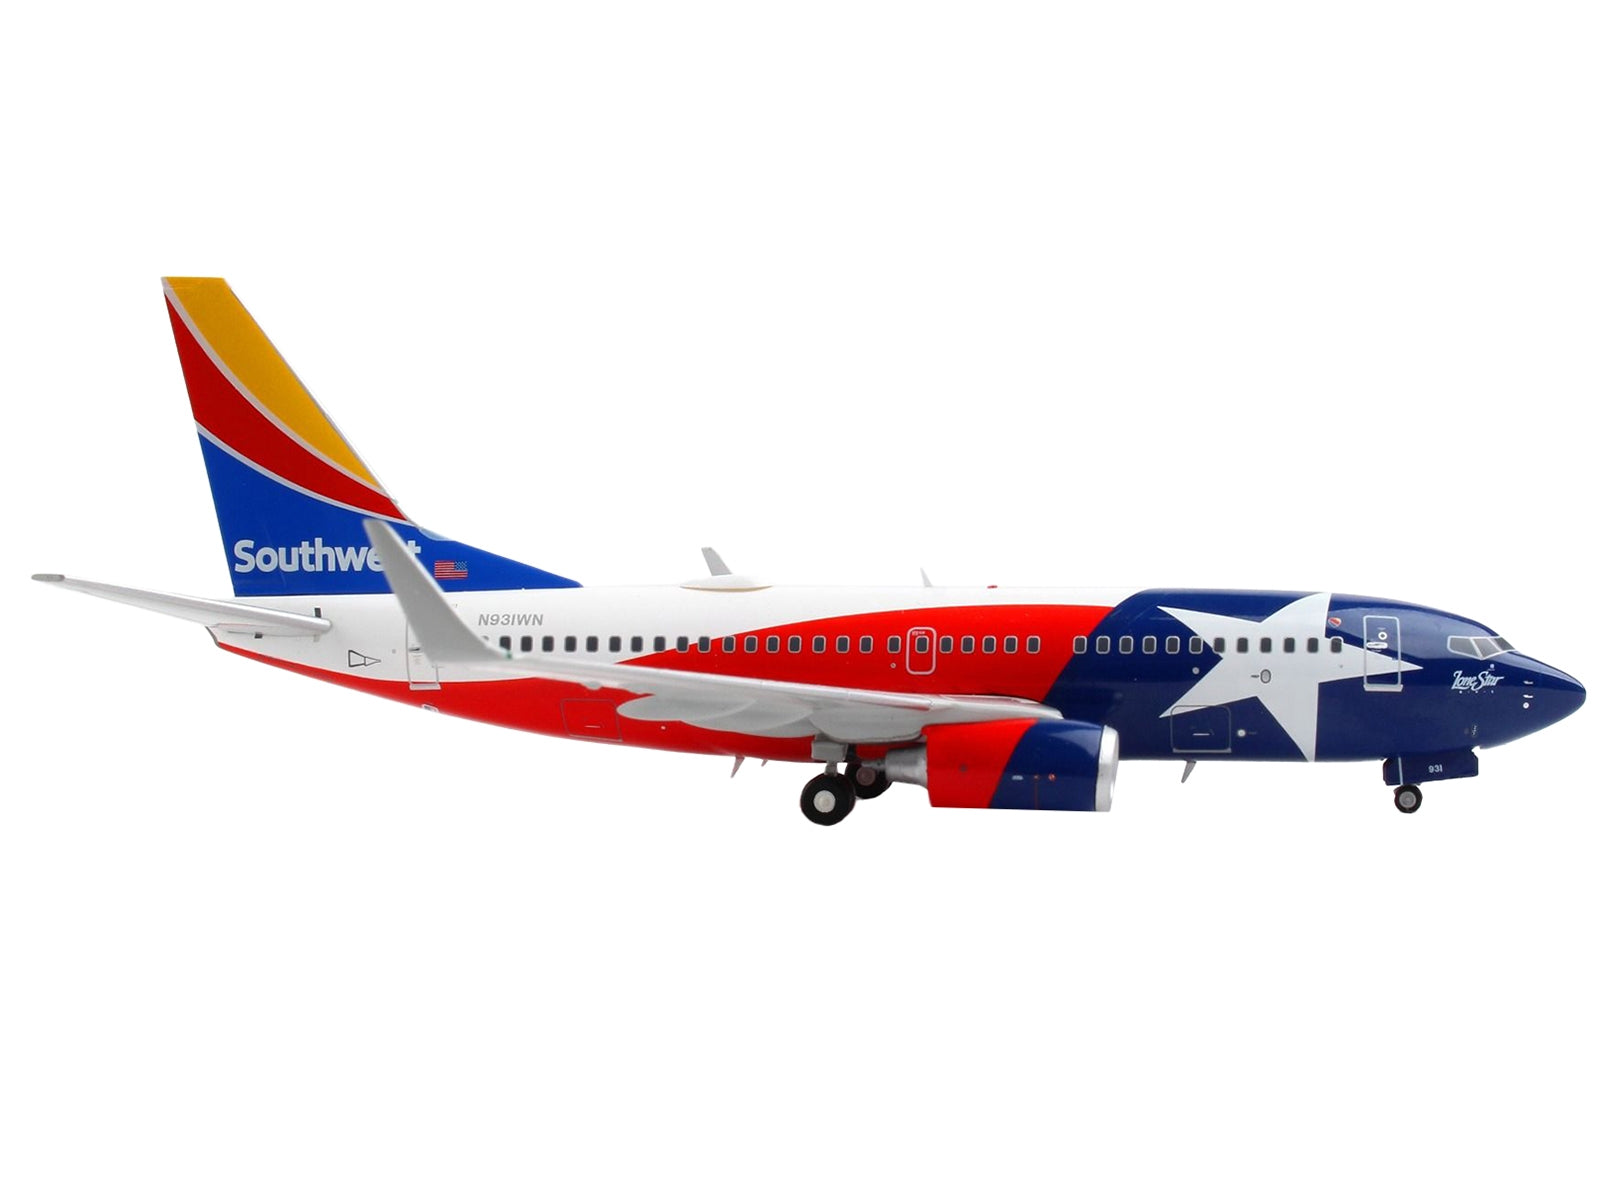 Boeing 737-700 Commercial Aircraft "Southwest Airlines